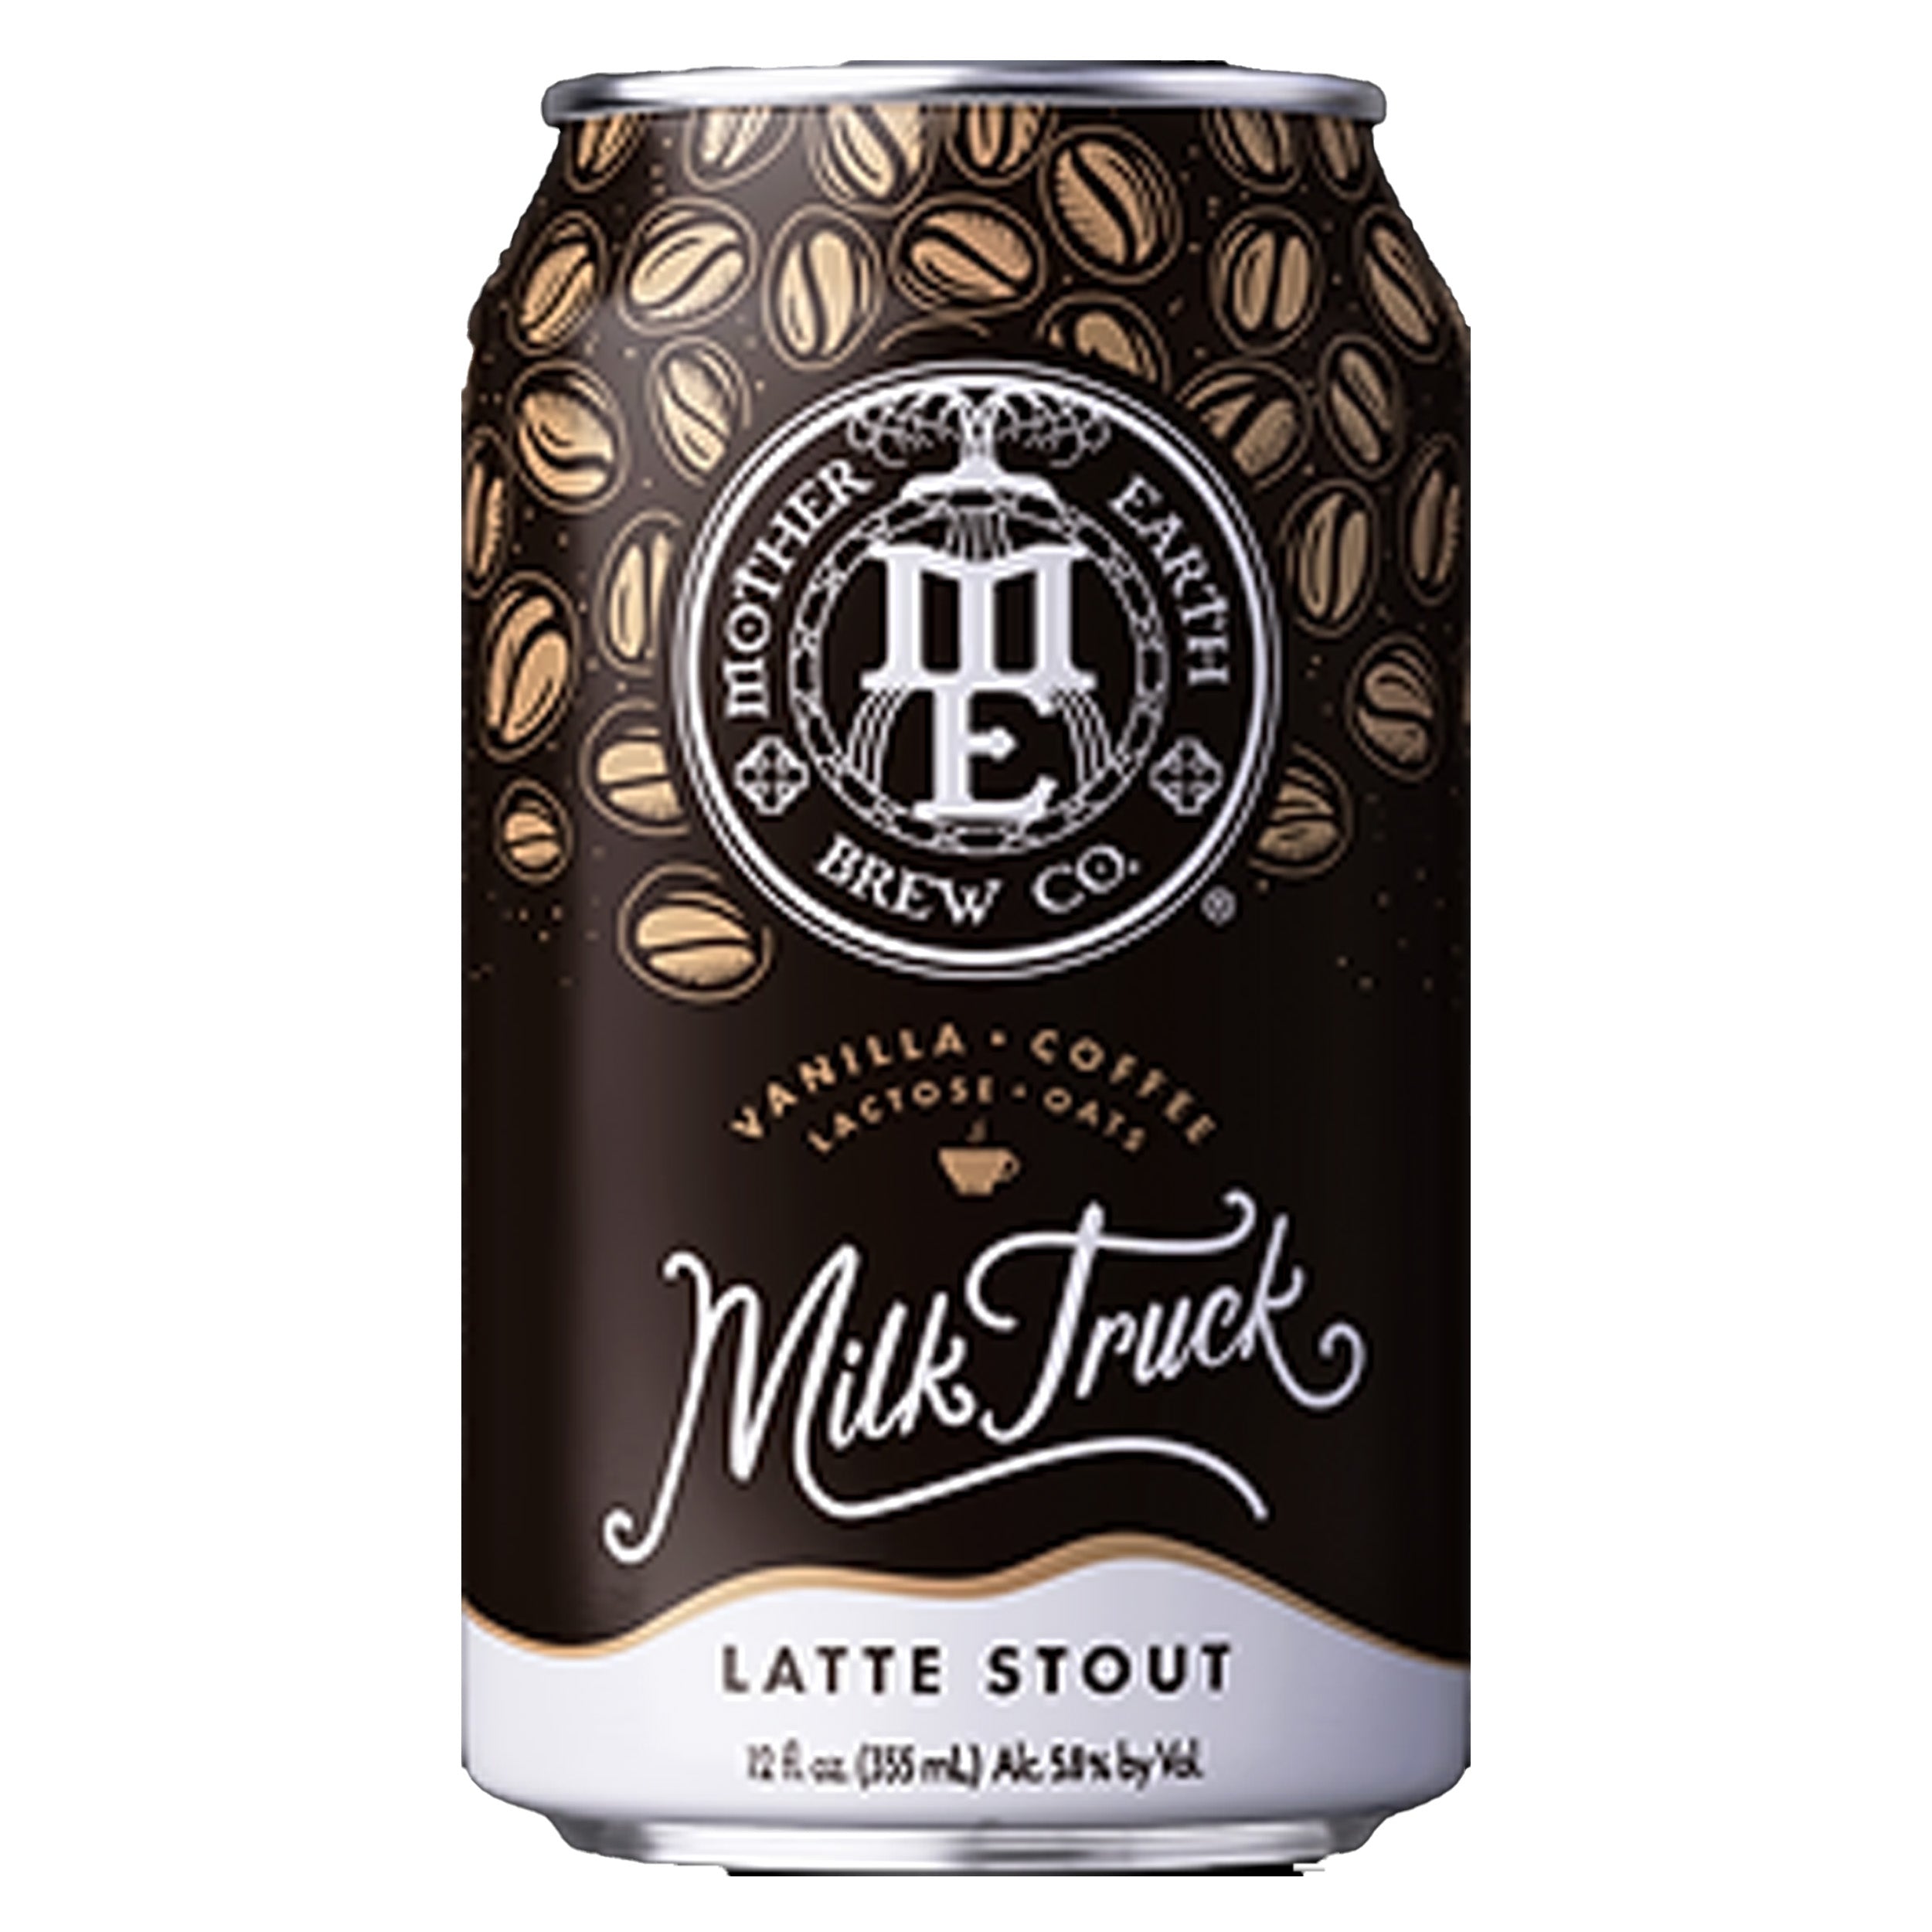 Mother Earth Milk Truck Latte Stout 6pack